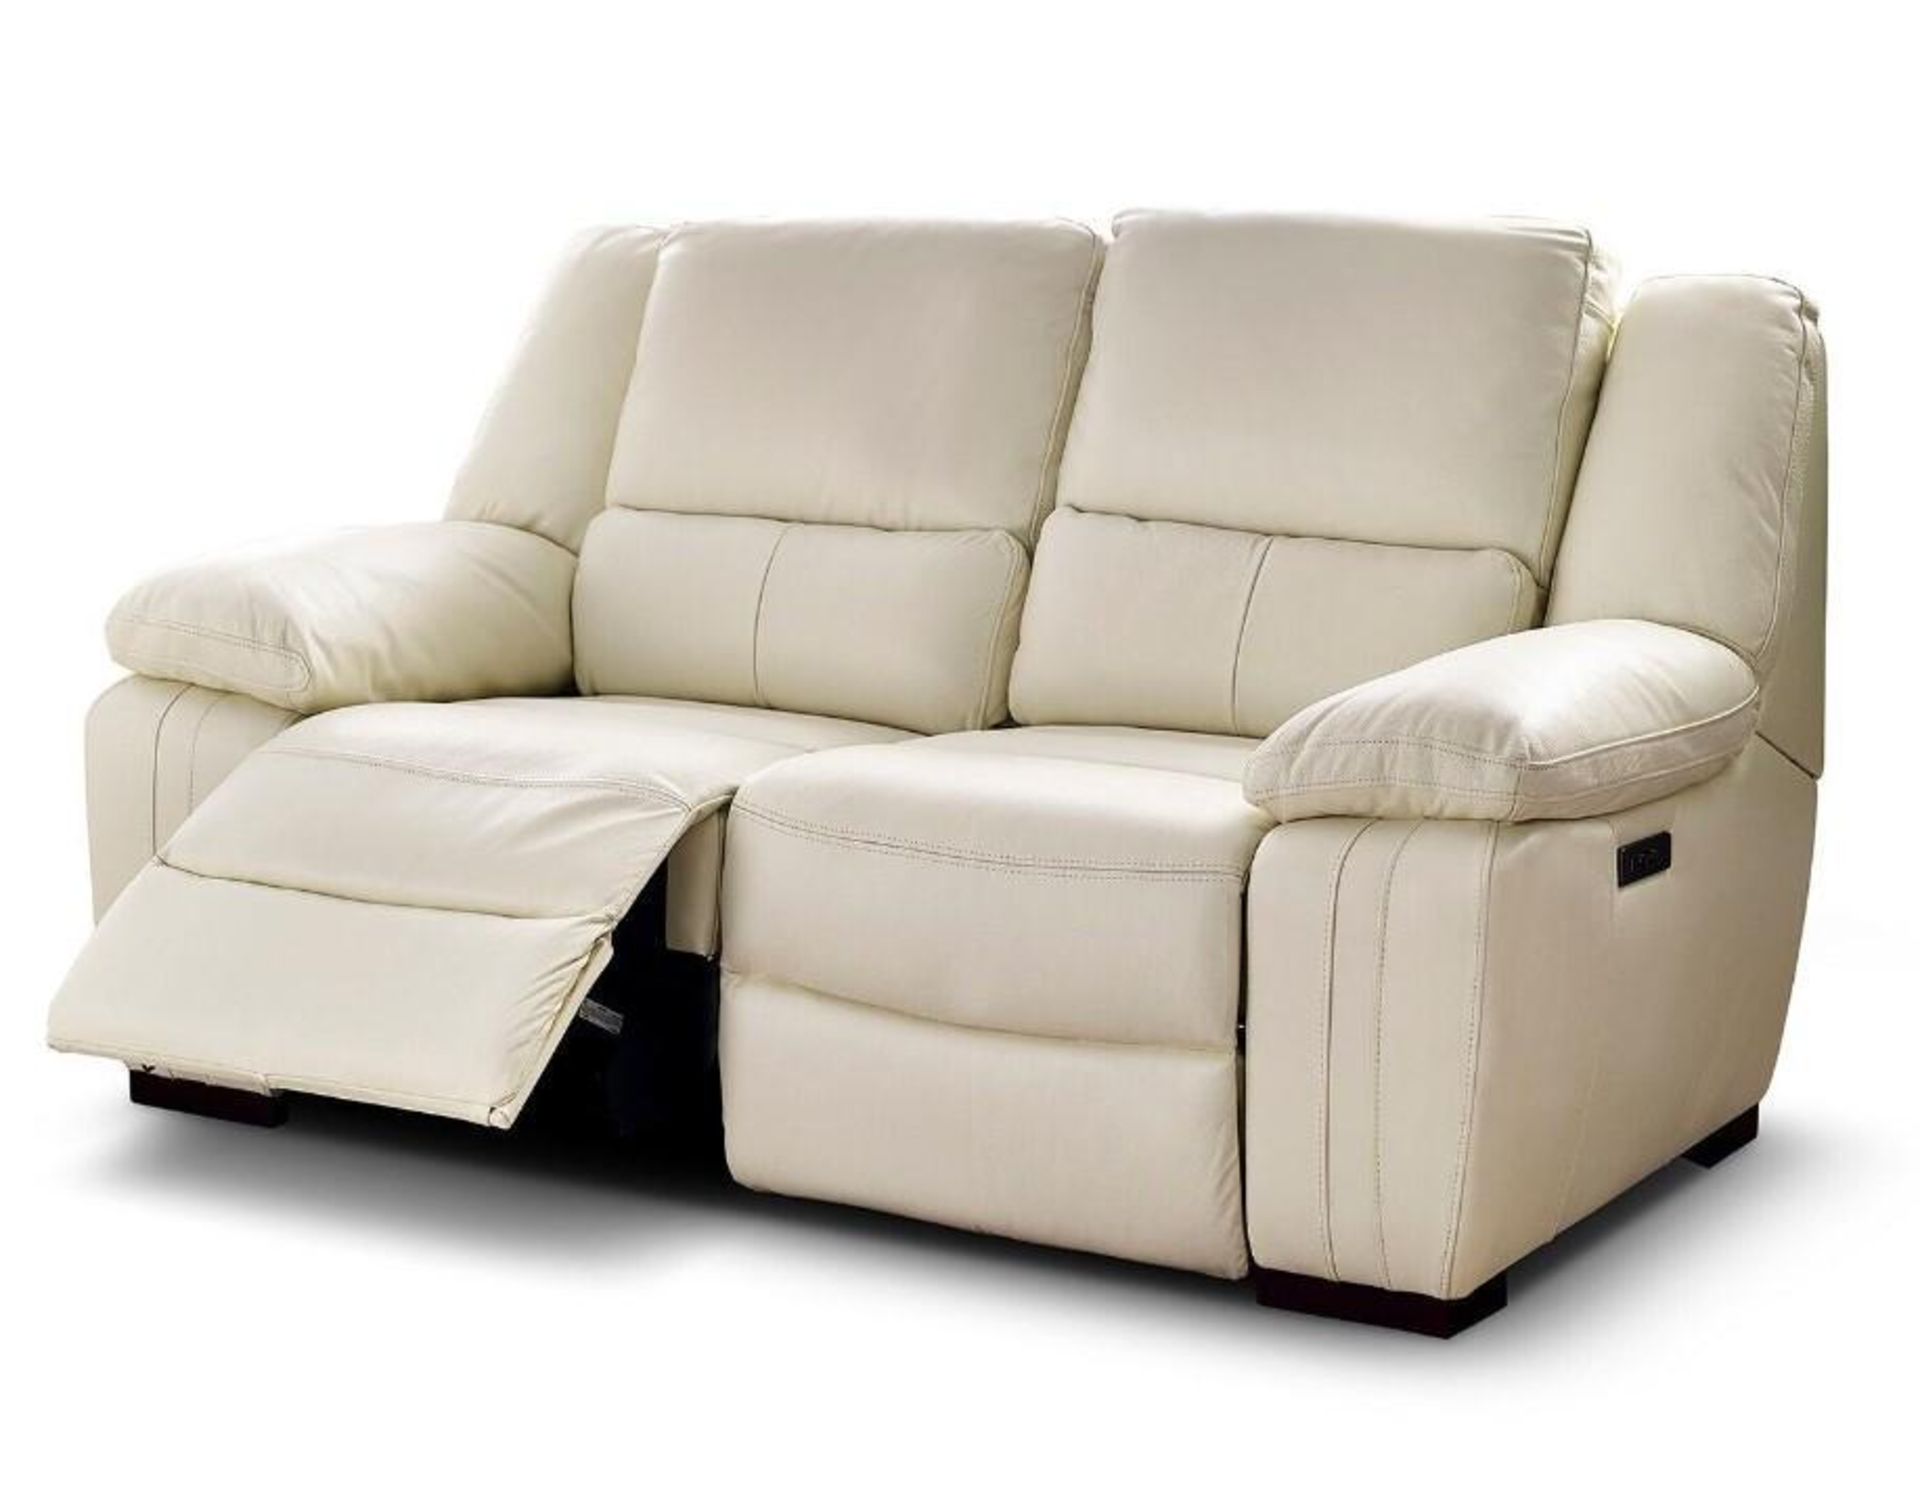 Brand new and boxed SCS Fallon 3 + 2 seater electric reclining sofa in Cream. - Image 2 of 7